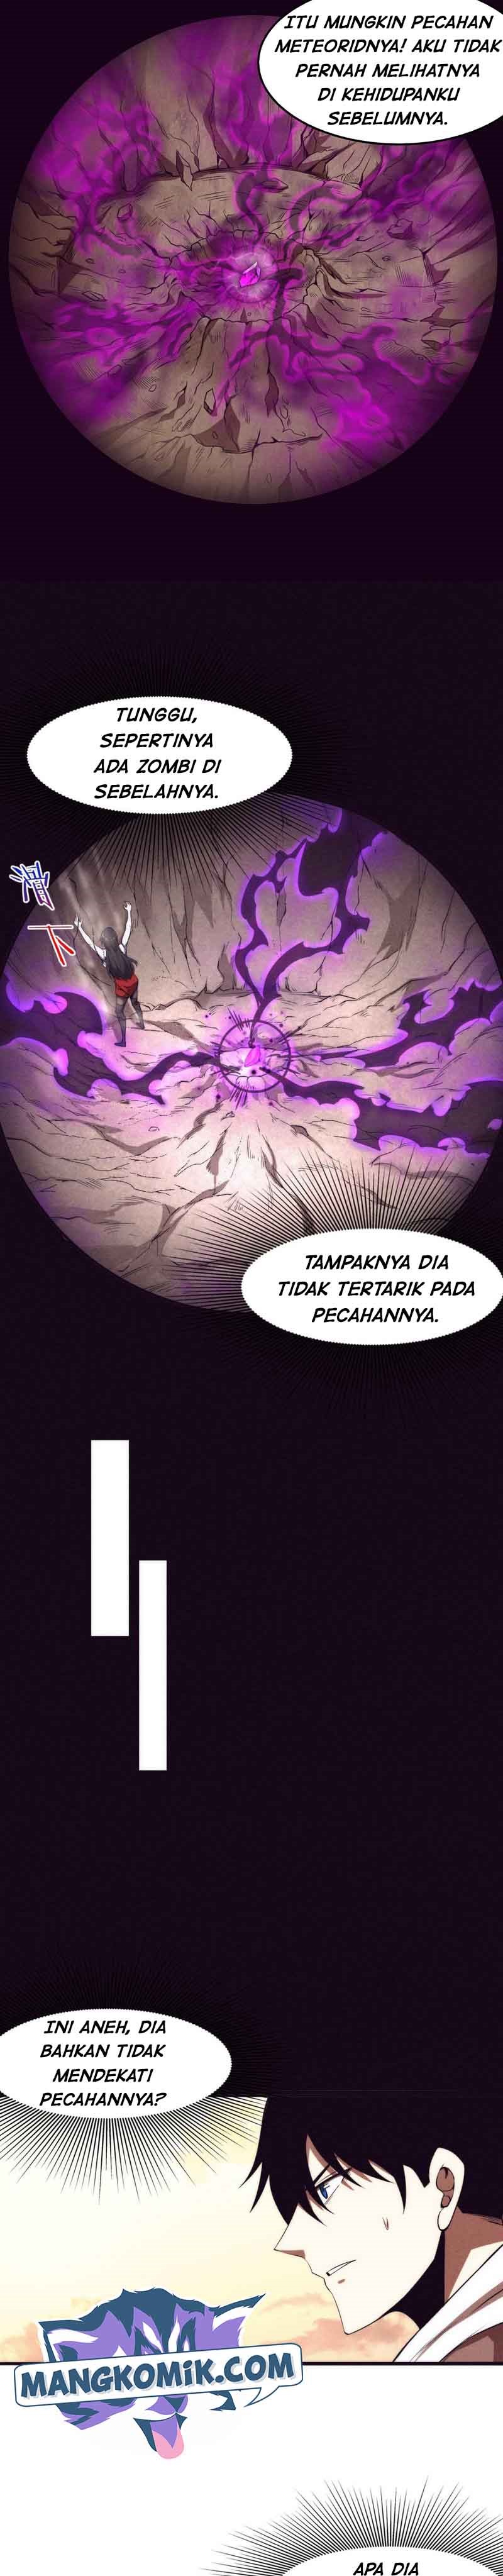 Evolution frenzy Chapter 07 bahasa indoensia